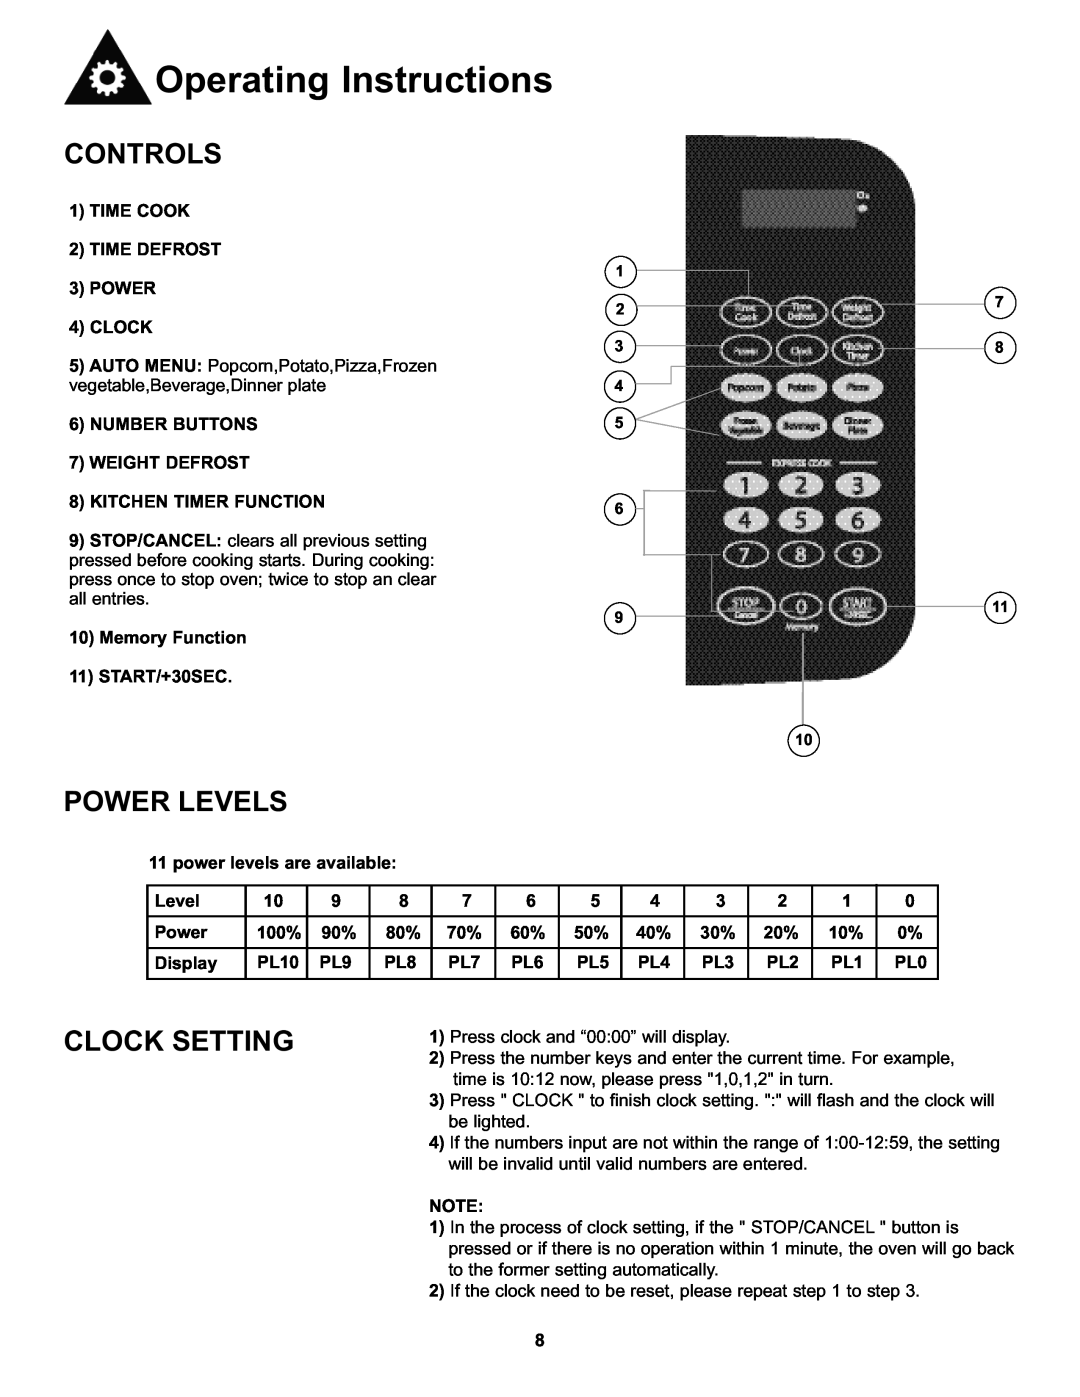 Danby DMW7700WDB Controls, Power Levels, Clock Setting, Operating Instructions, TIME COOK 2 TIME DEFROST 3 POWER 4 CLOCK 